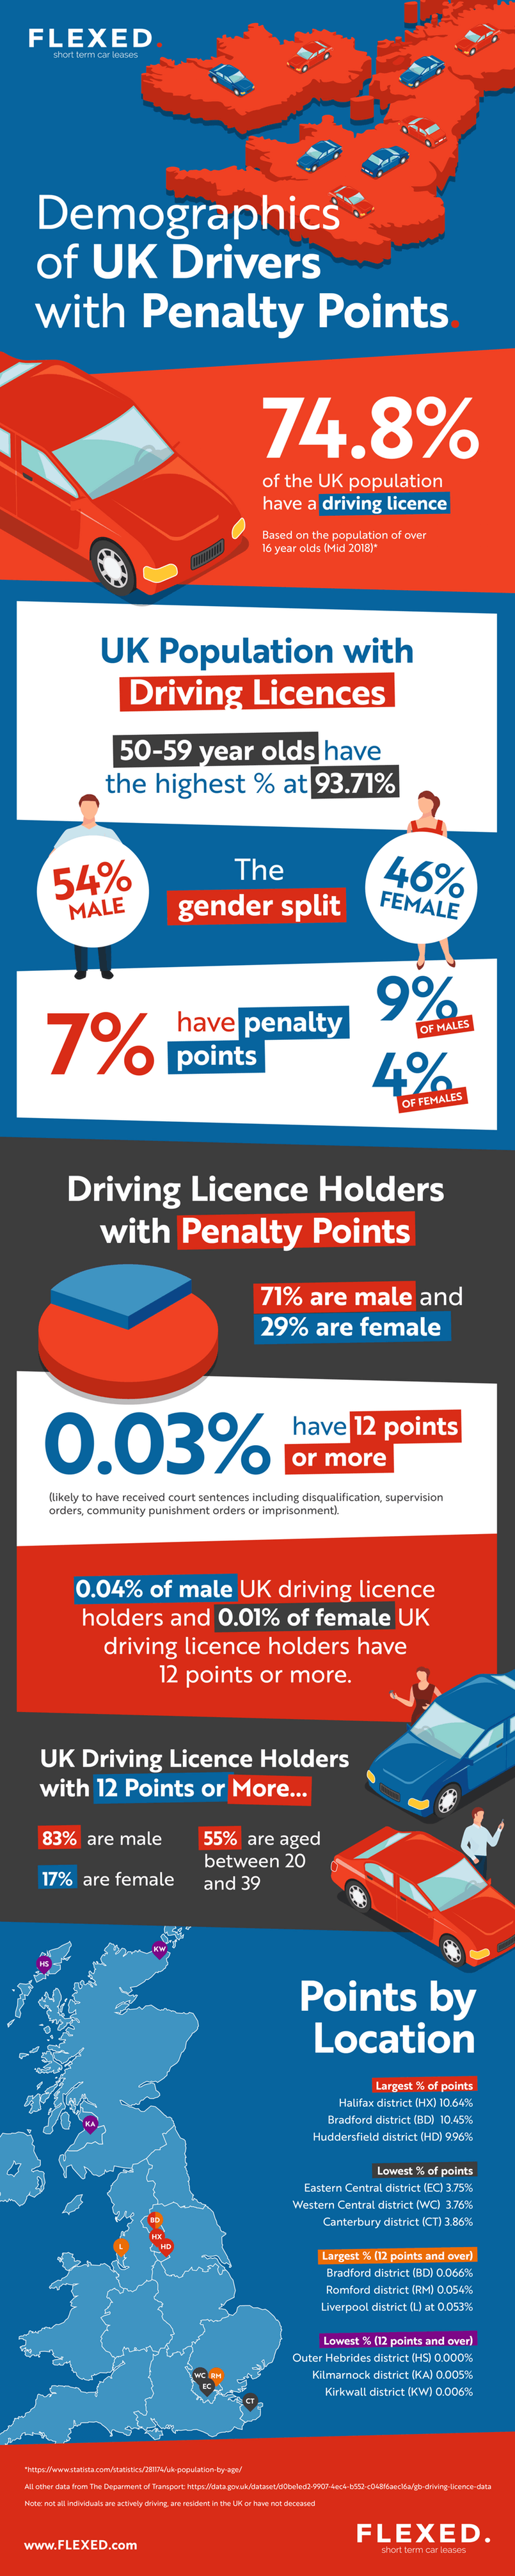 Driver Penalty Points: Who is Most Likely to Have Them?